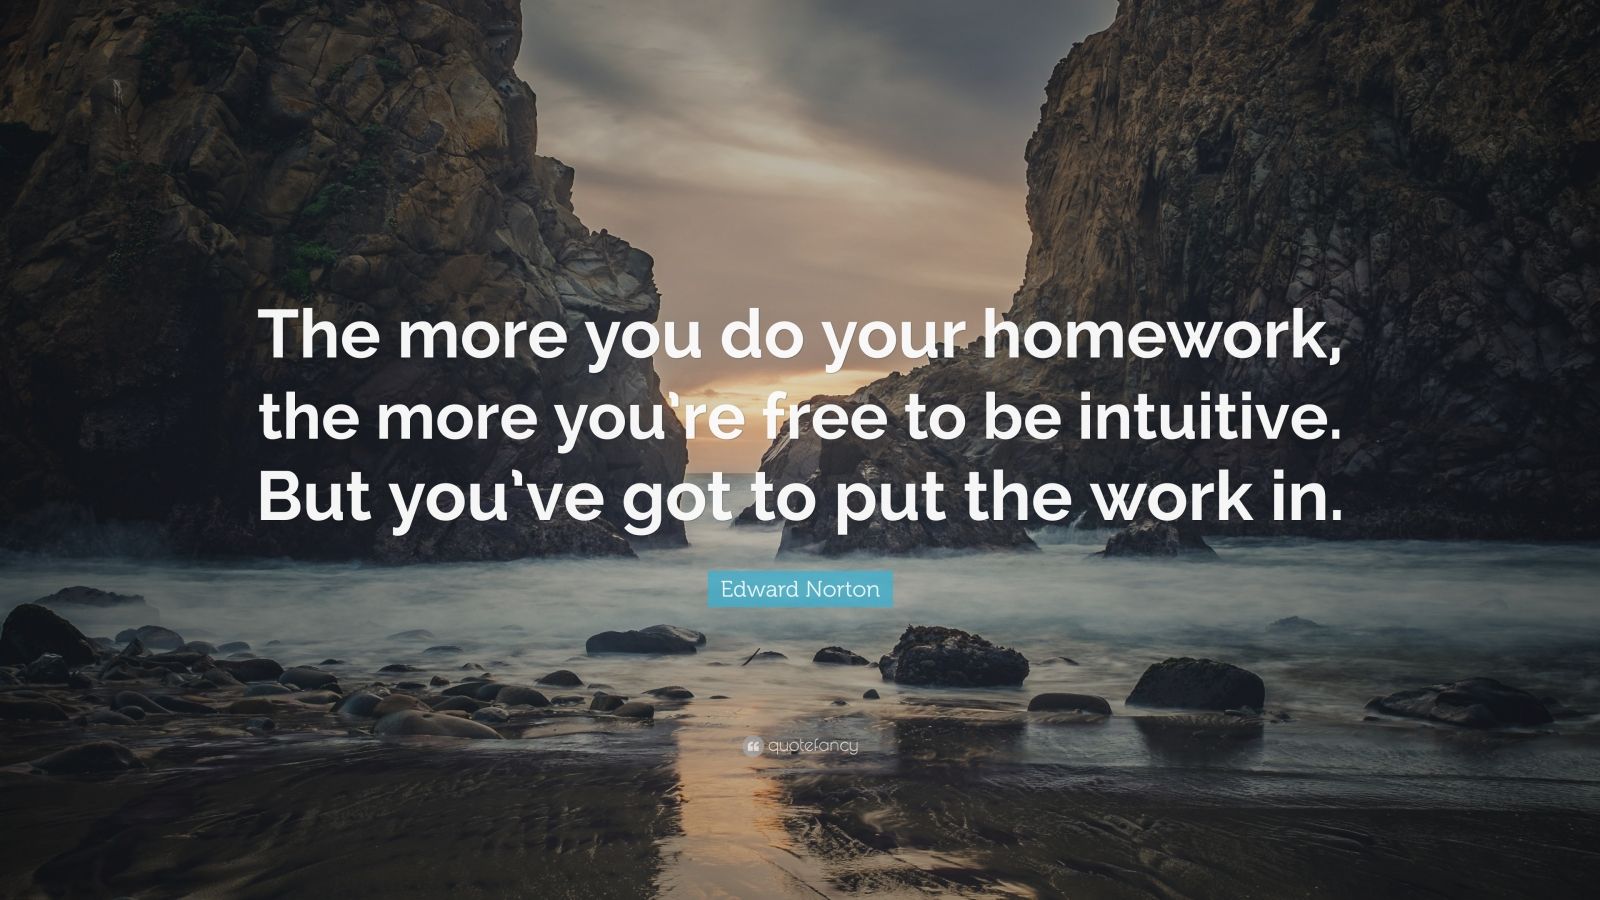 famous quote about homework